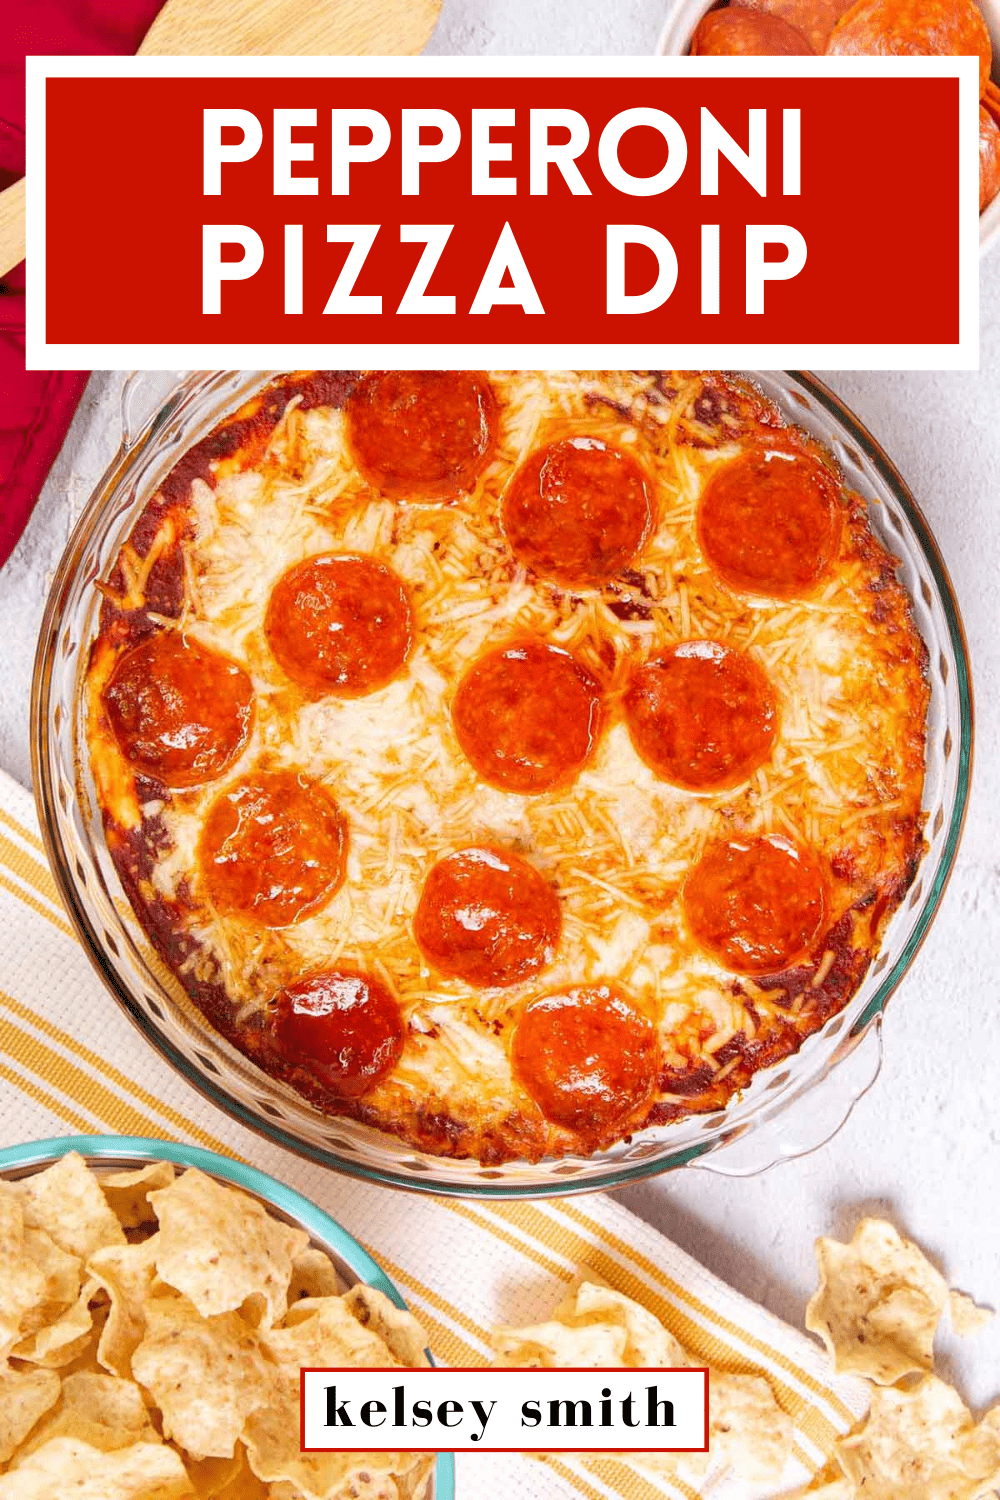 Top down view of pizza dip baked in a pie plate. The dip is topped with pepperoni. Text at the top reads Pepperoni Pizza Dip.